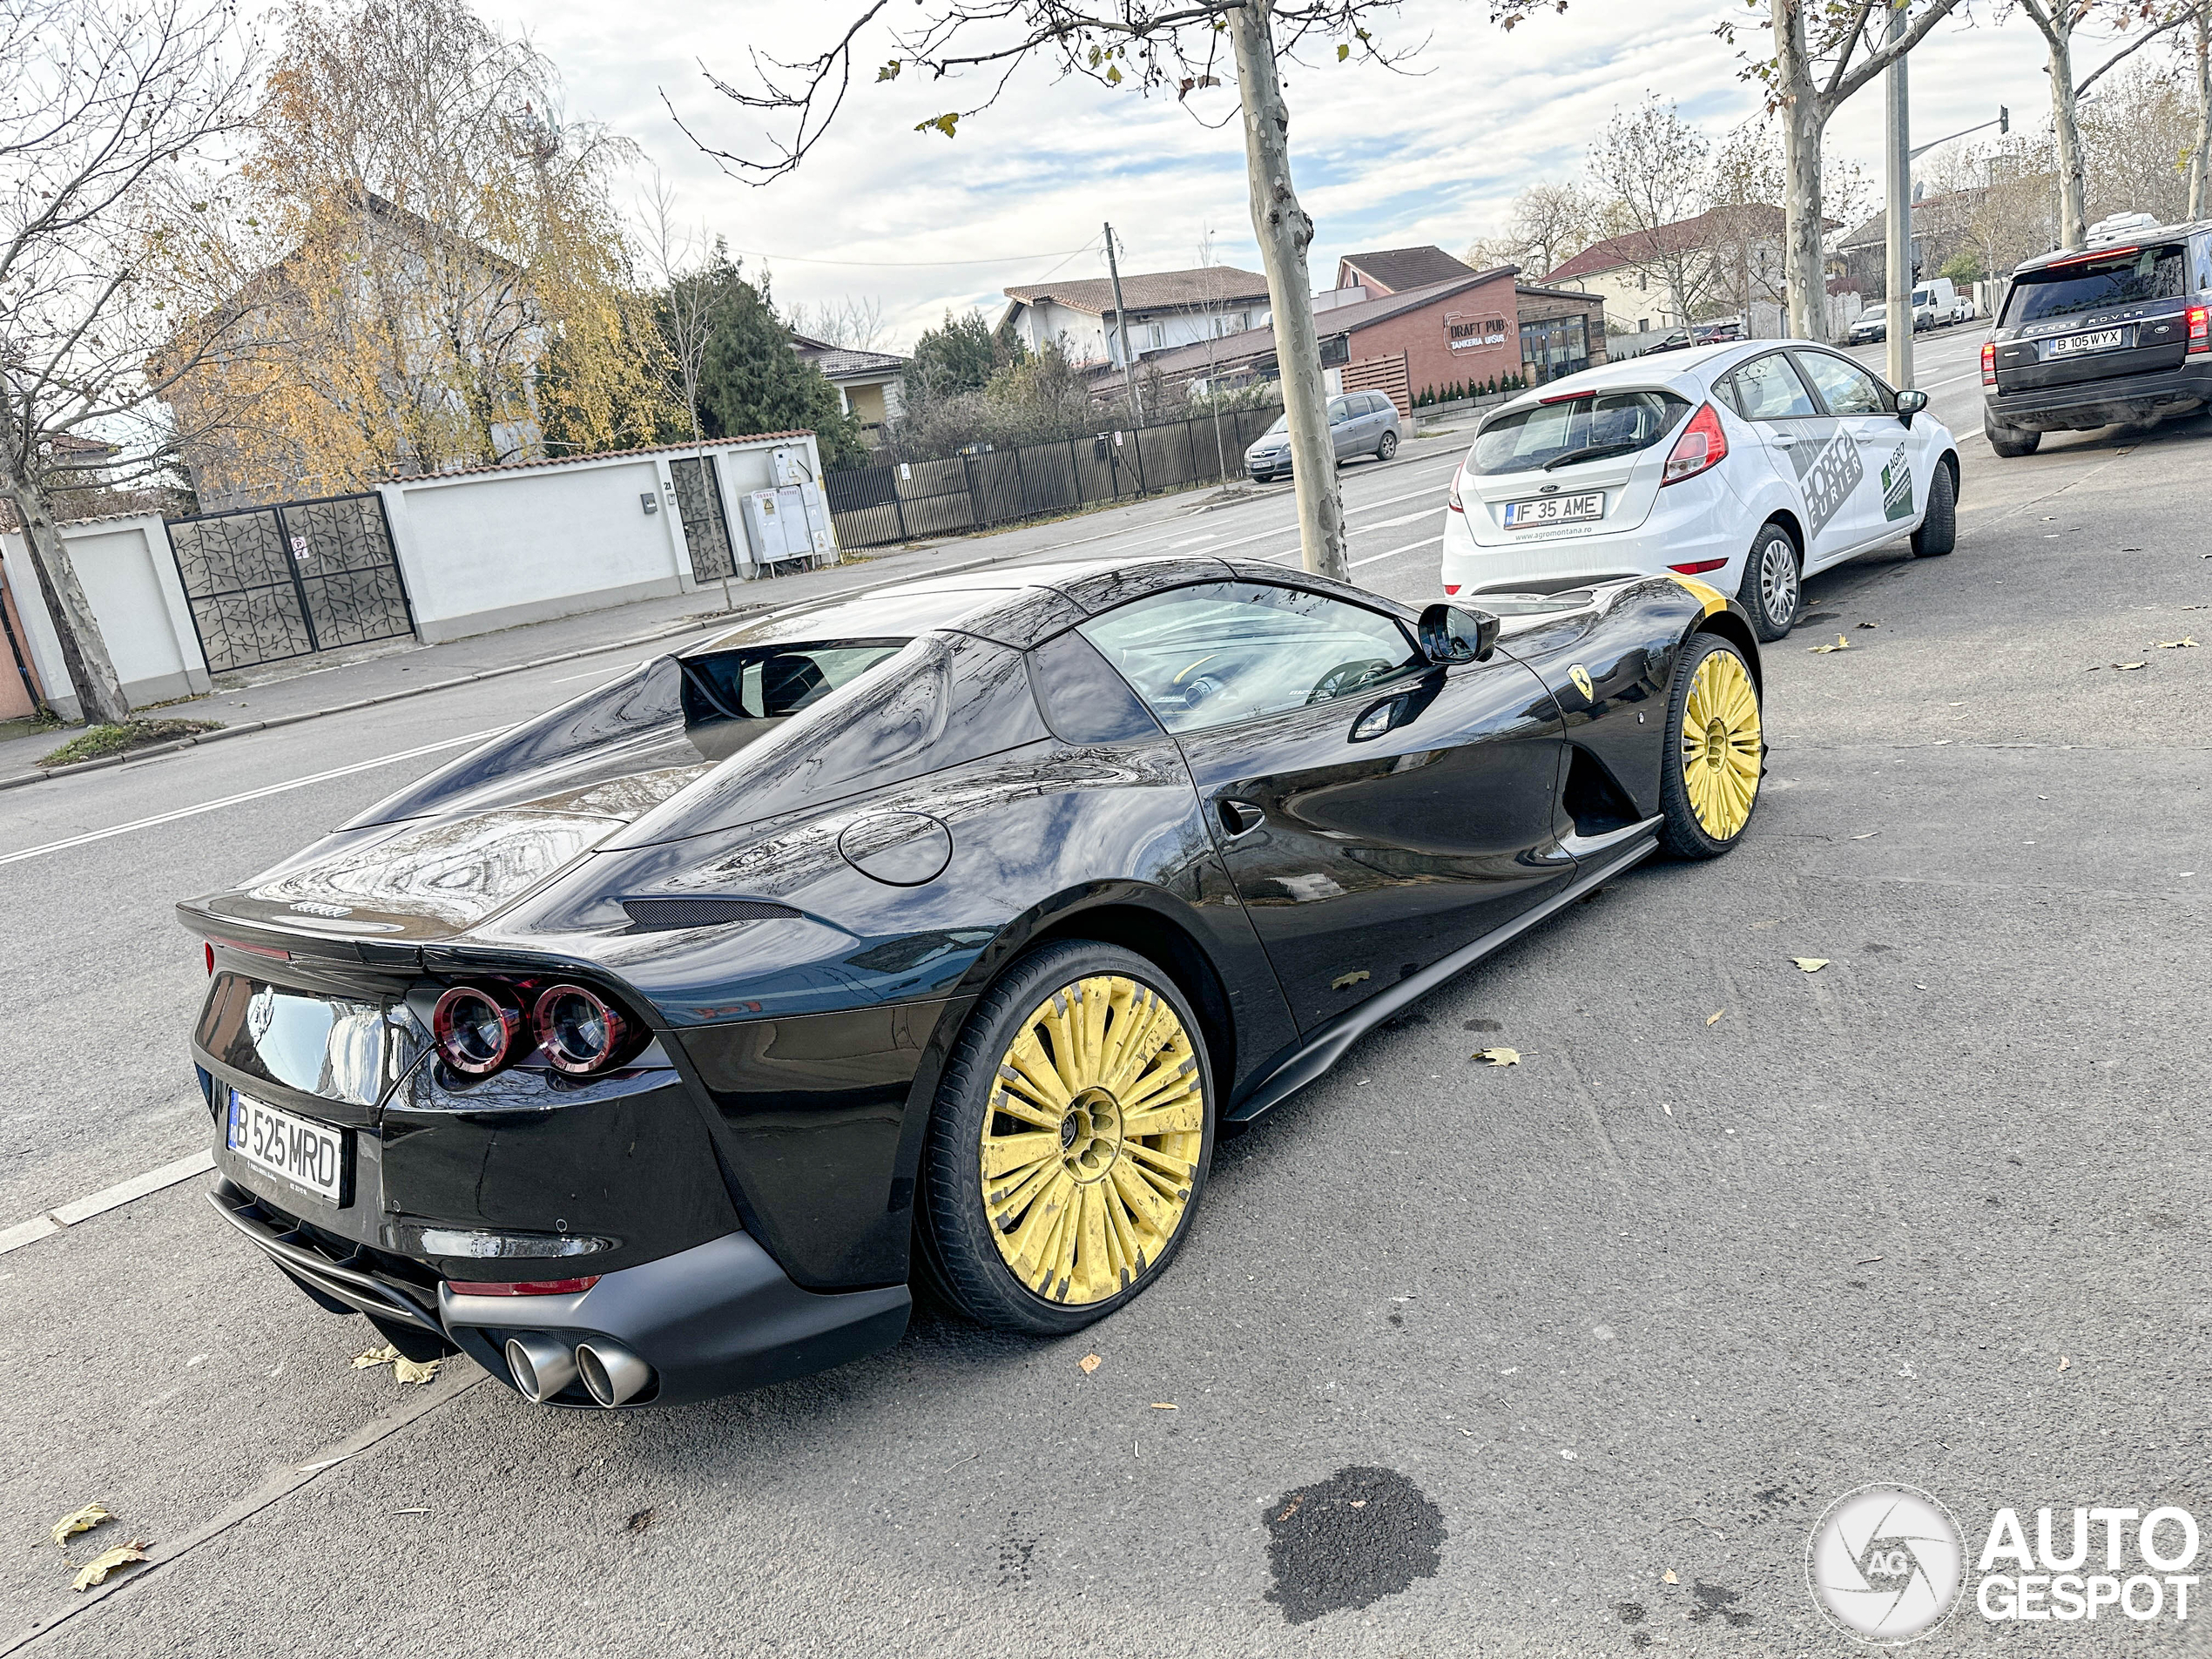 Here we see the ugliest rims ever mounted on a Ferrari 812 GTS.